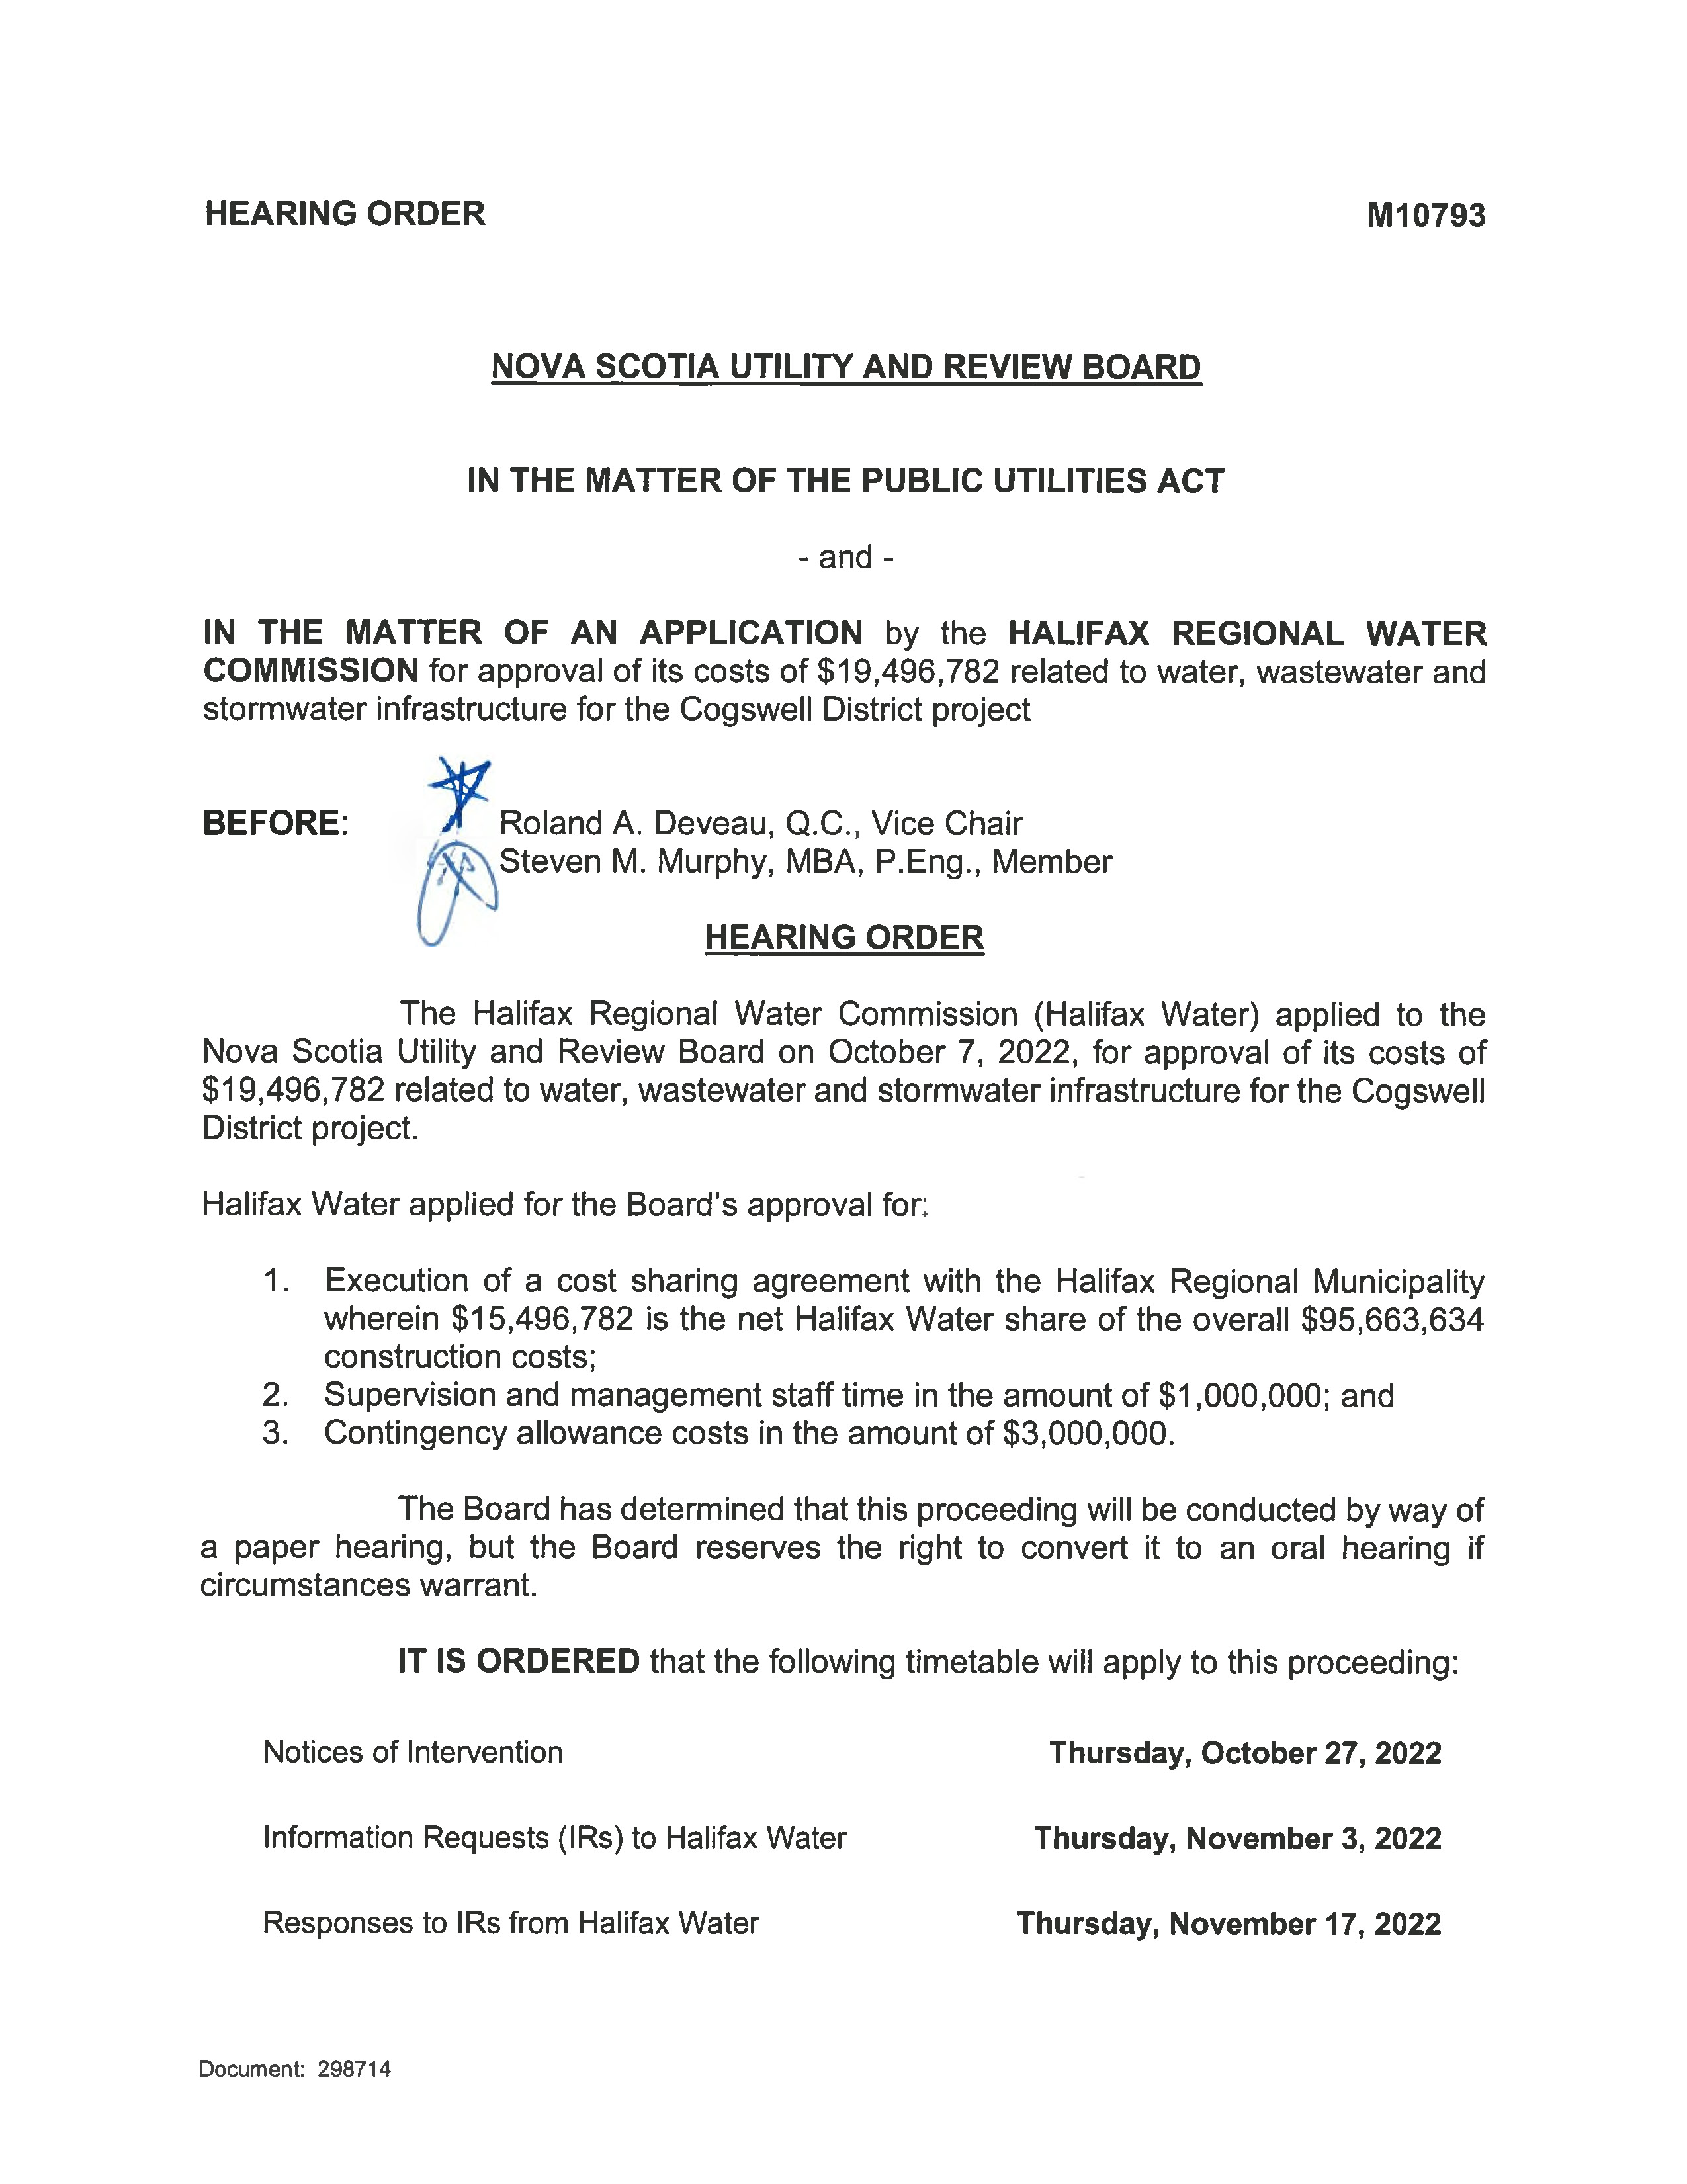 M10793 - Hearing Order_Page_1